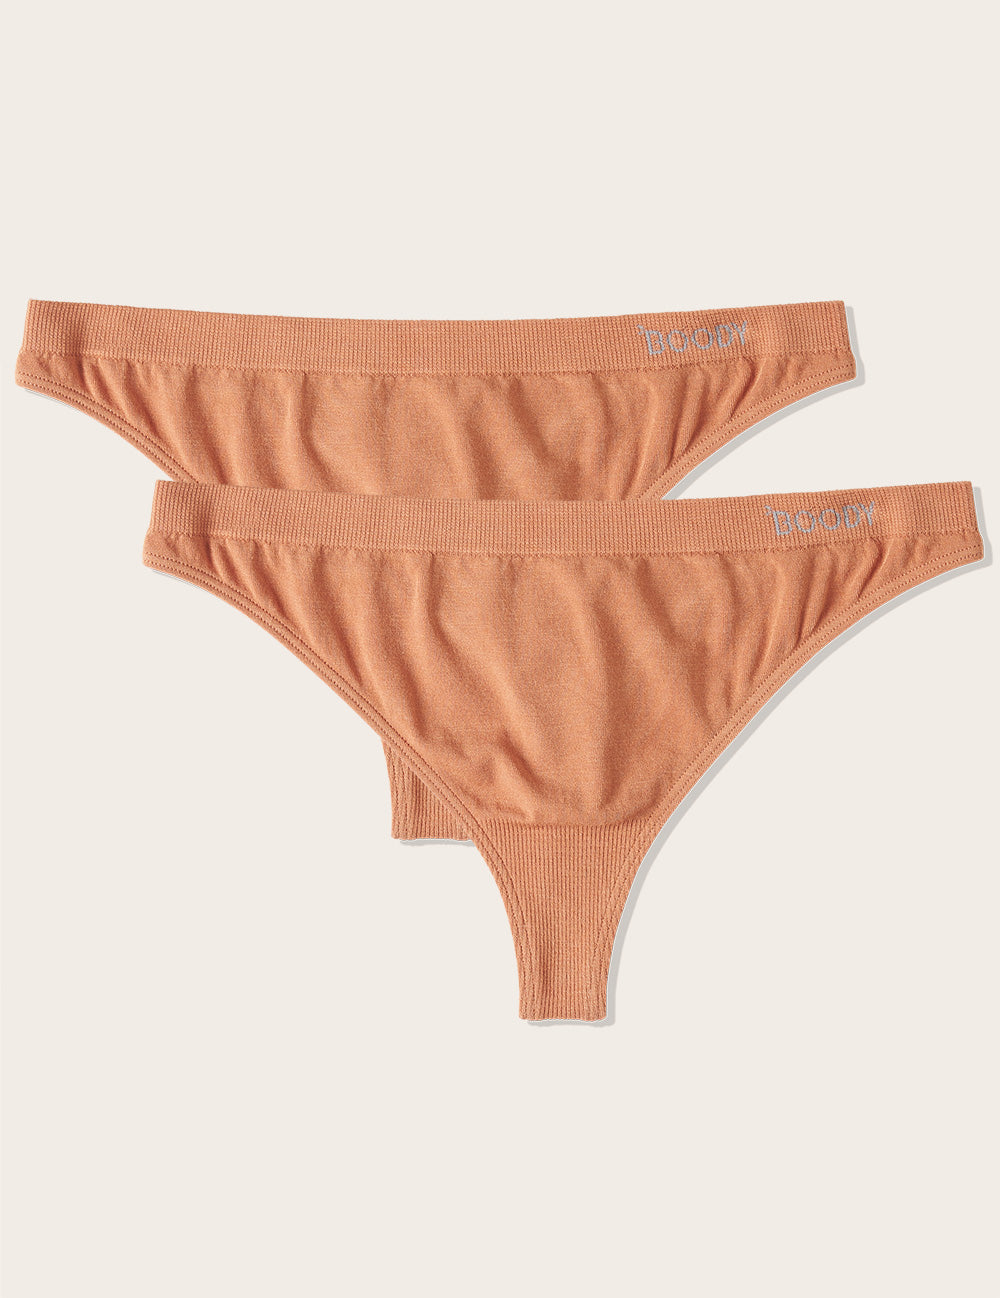 Boody Bamboo 2-pack of G-String Women's Underwear in Nude 2